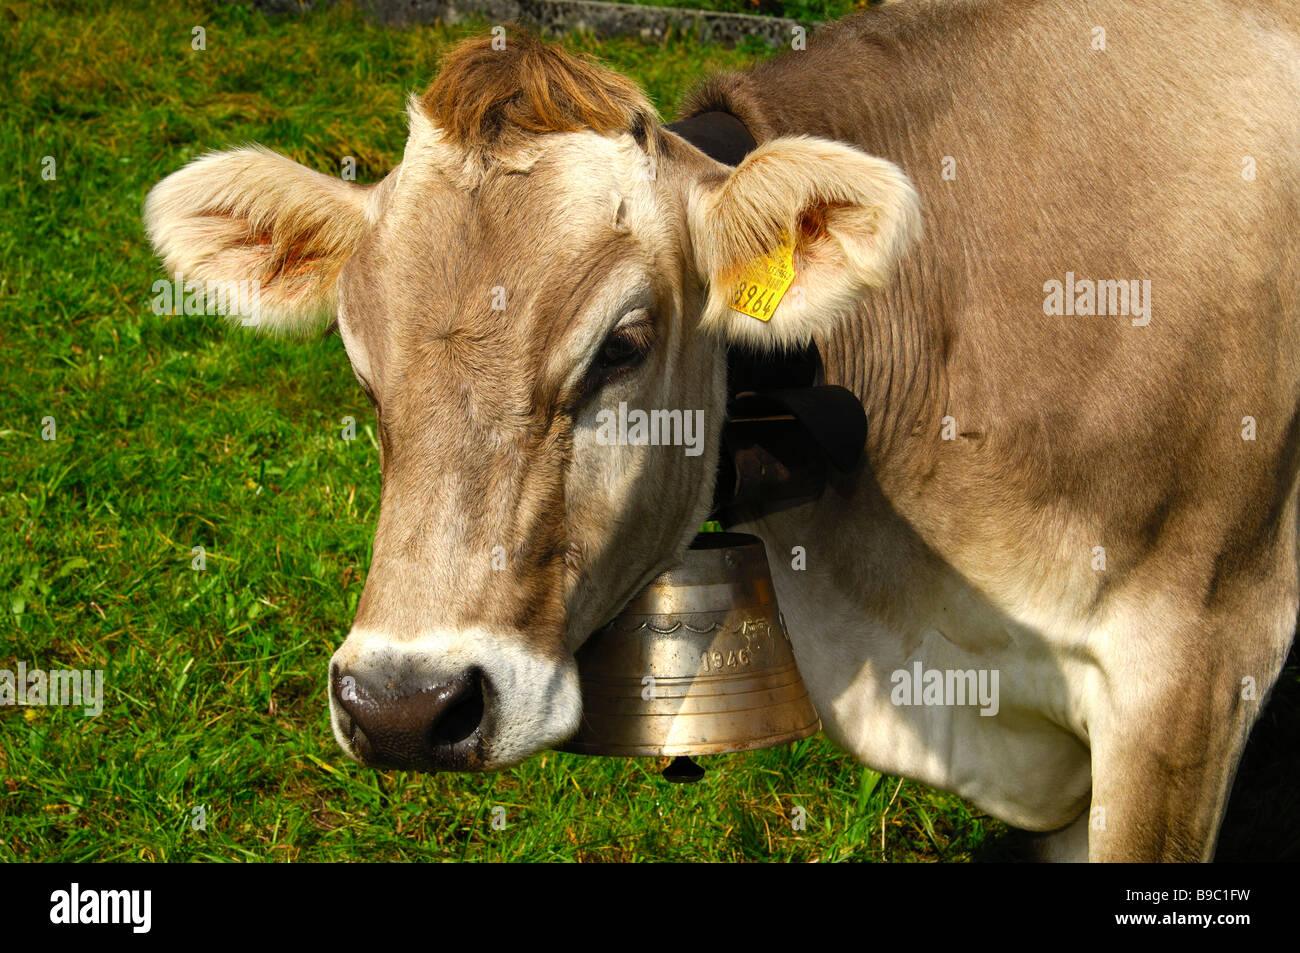 Hornless Swiss Brown cattle with an ear tag and a cow bell, Canton of Vaud, Switzerland Stock Photo